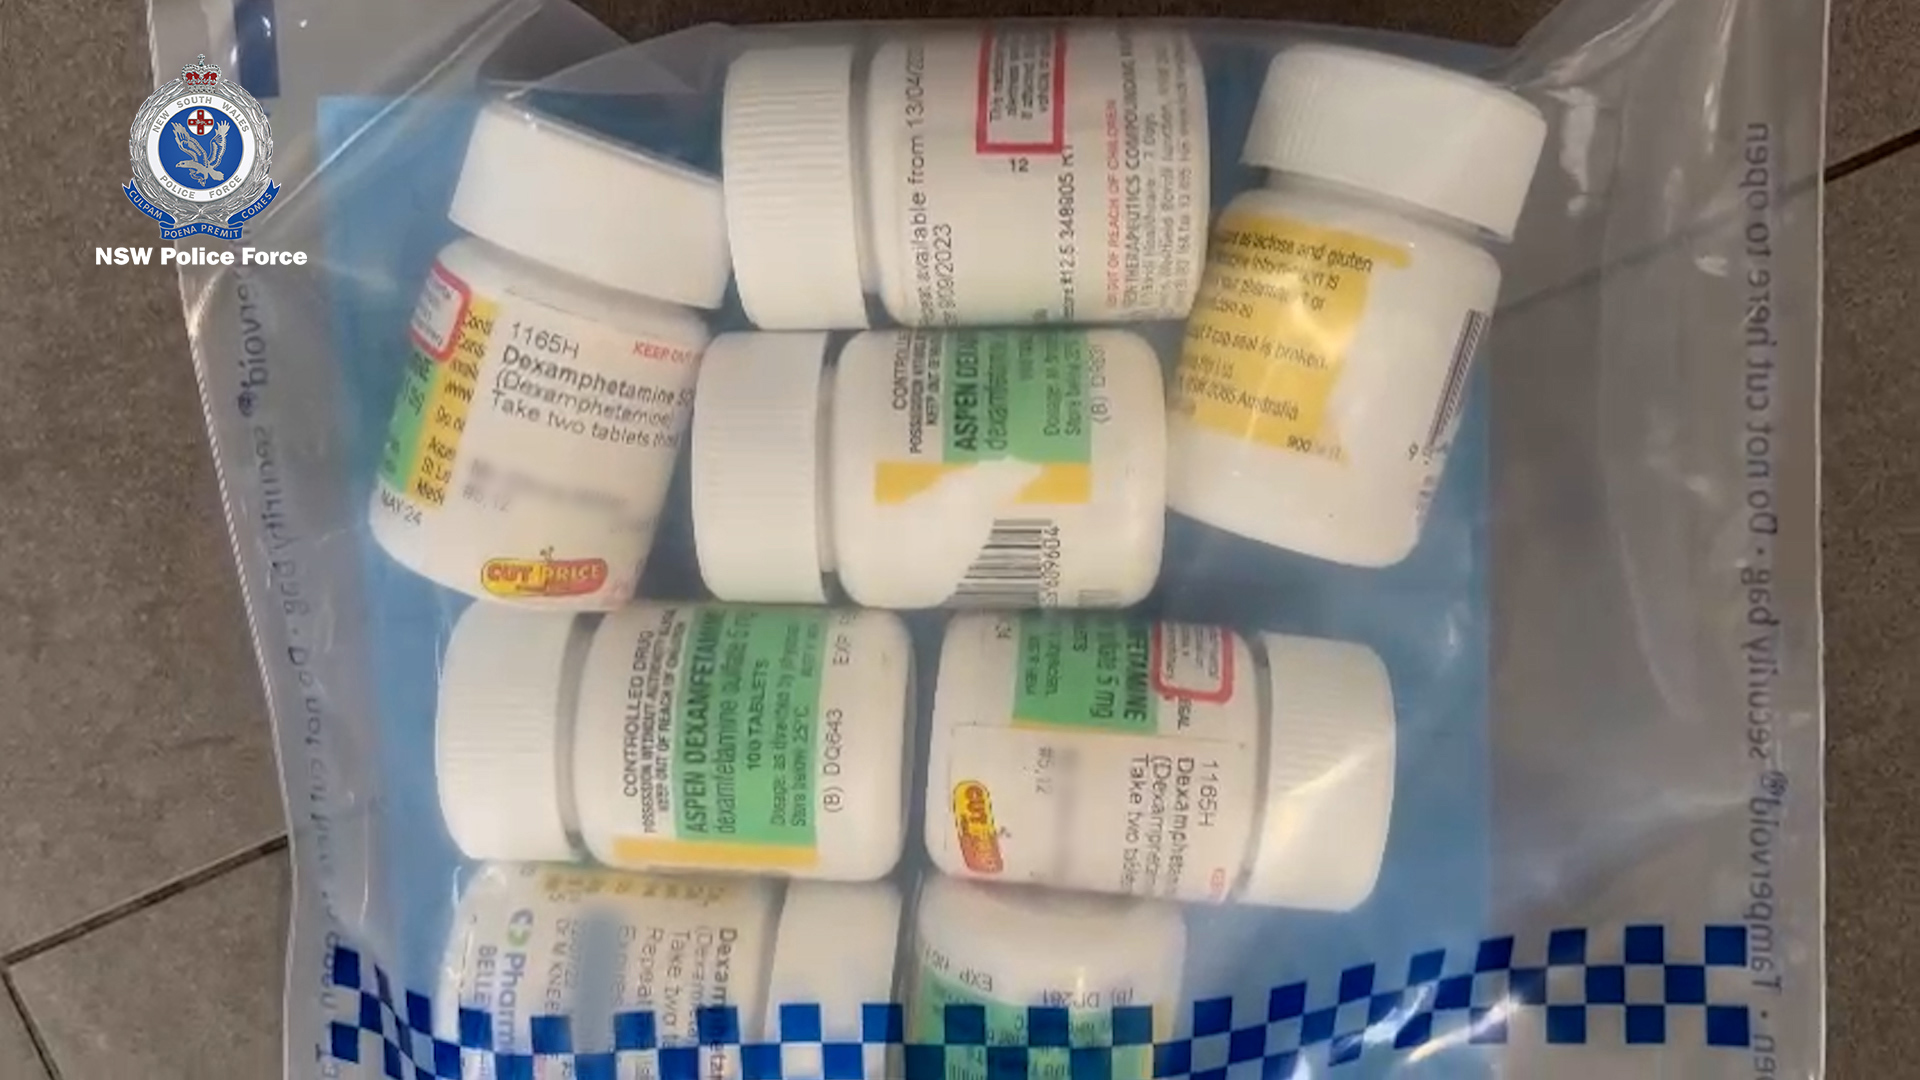 A﻿ man has been charged with supplying "large quantities" of drugs on the dark web since 2018 in Sydney's eastern suburbs.